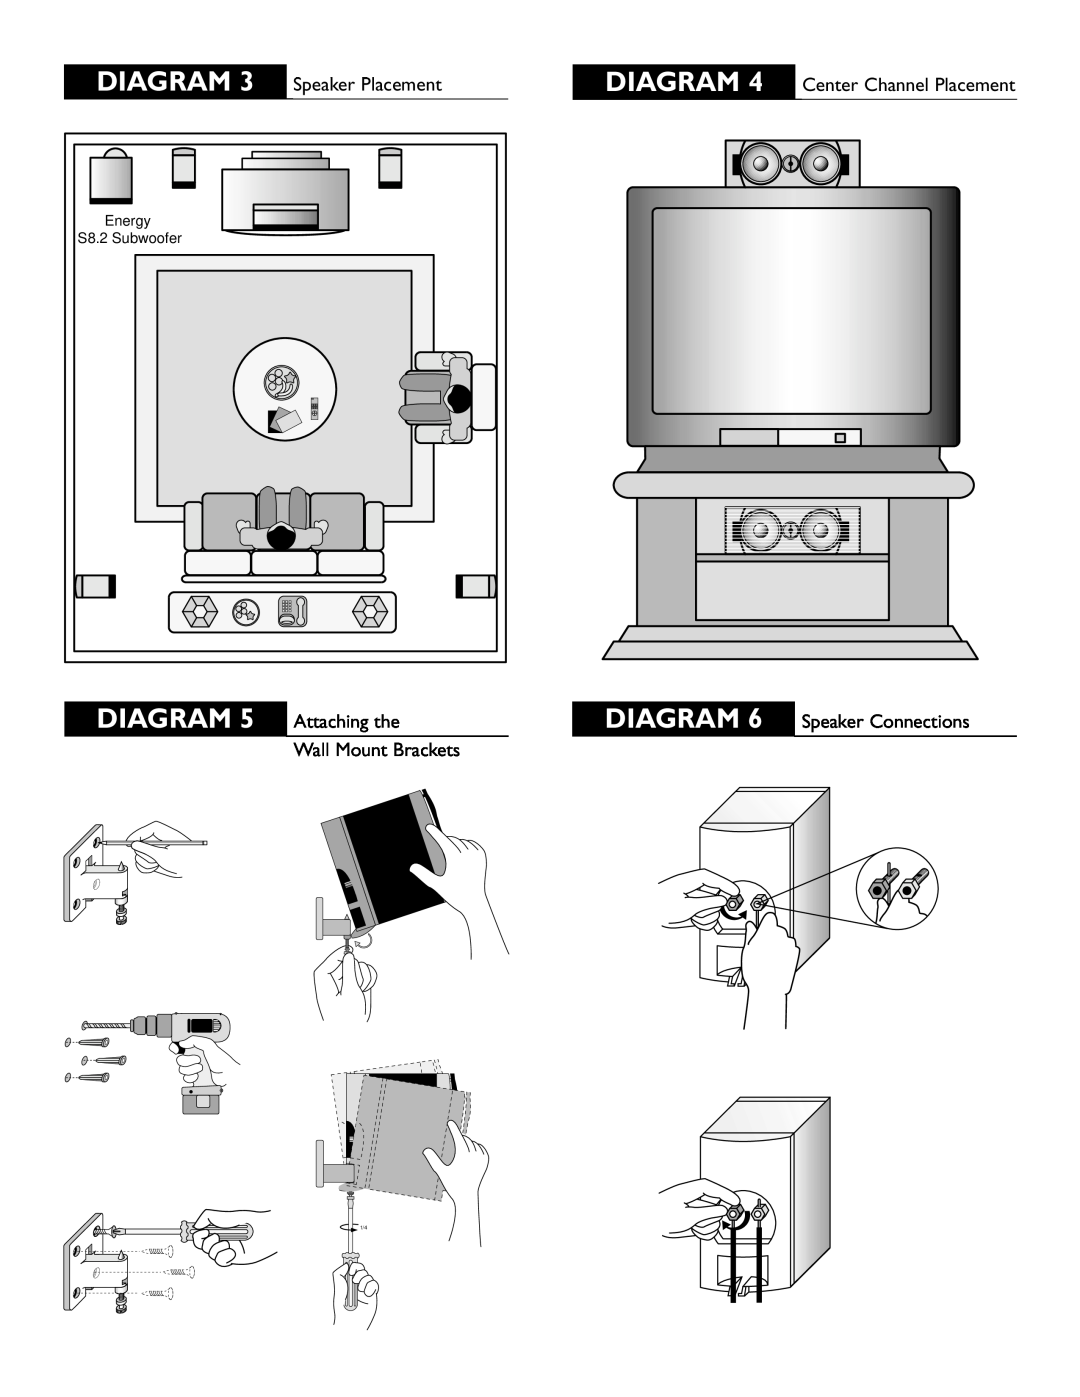 Energy Speaker Systems TAKE 5.2 DIAGRAM 3 Speaker Placement, DIAGRAM 5 Attaching the Wall Mount Brackets, Energy 